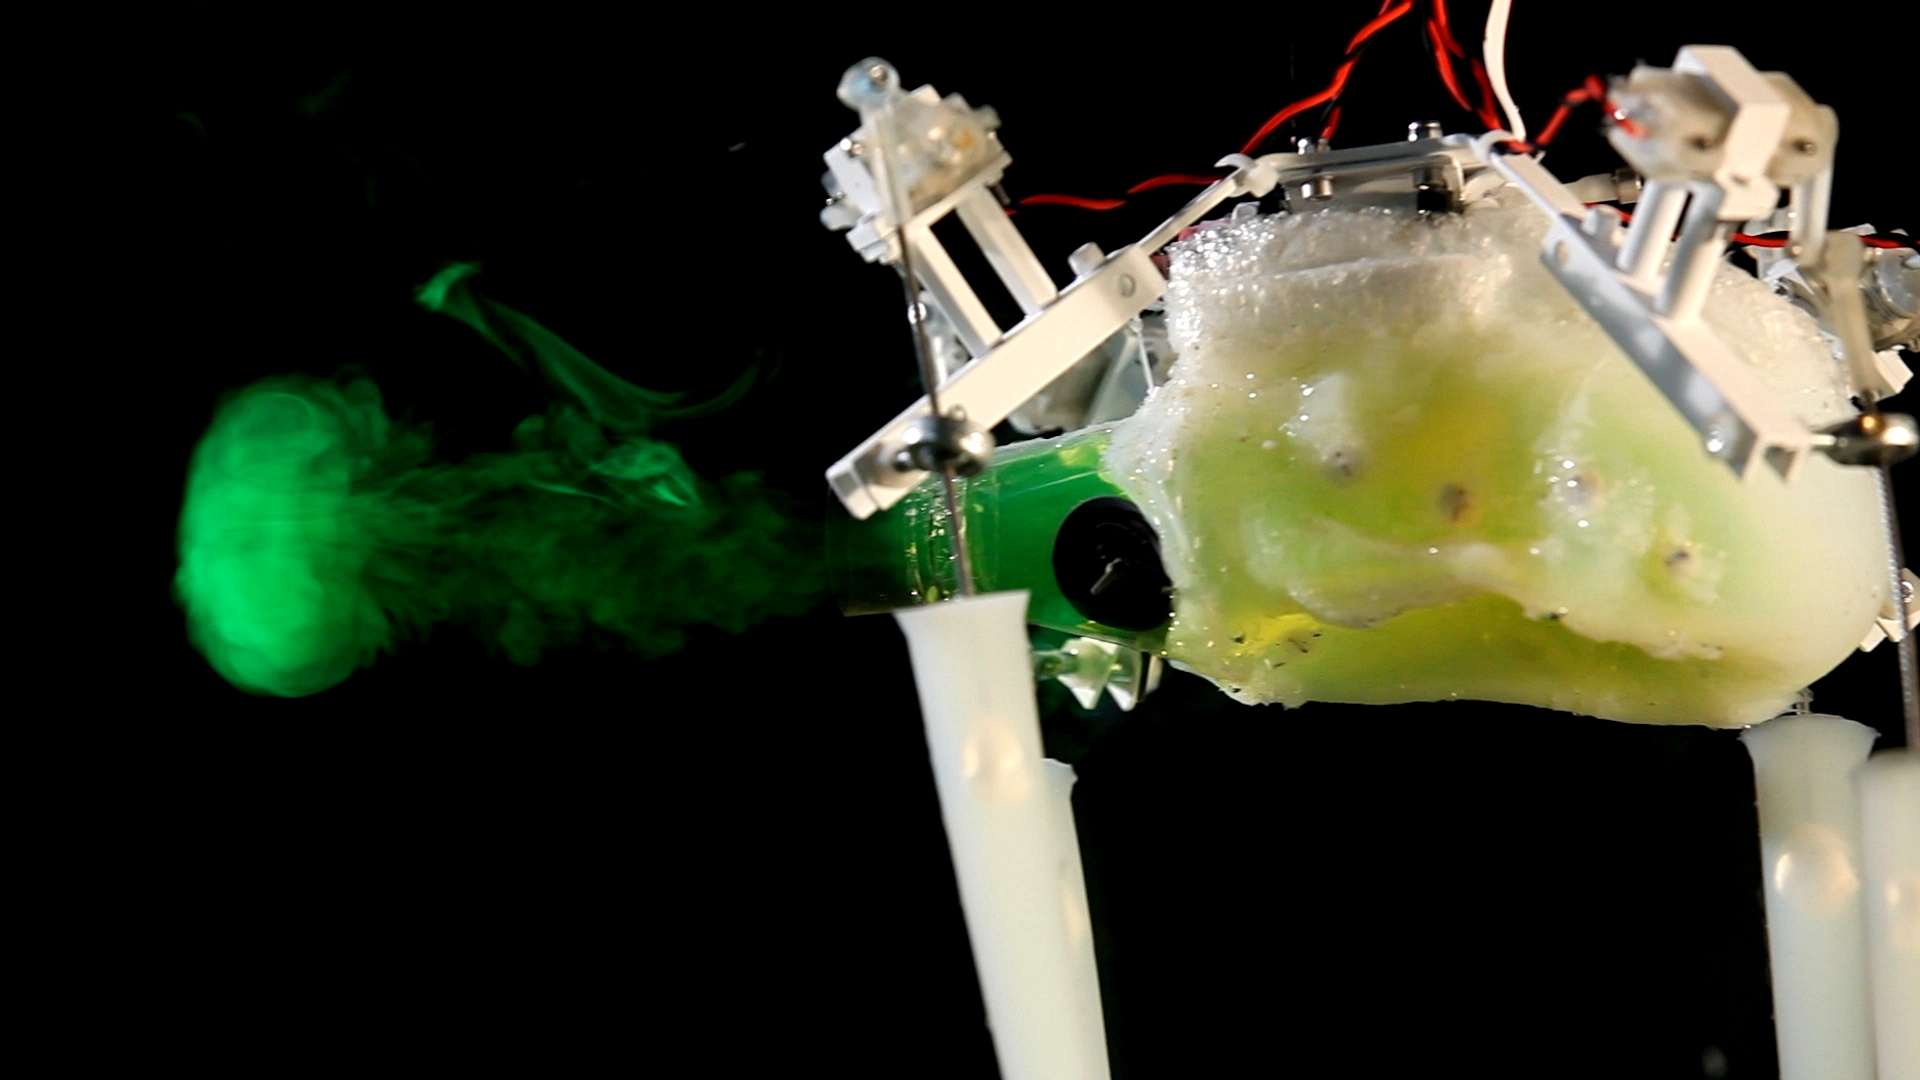 3 / 4 The researchers put cables and a small motor inside a flexible rubber shell, which can easily fill up and expel water. Image credit: Age of Robots, M. Brega